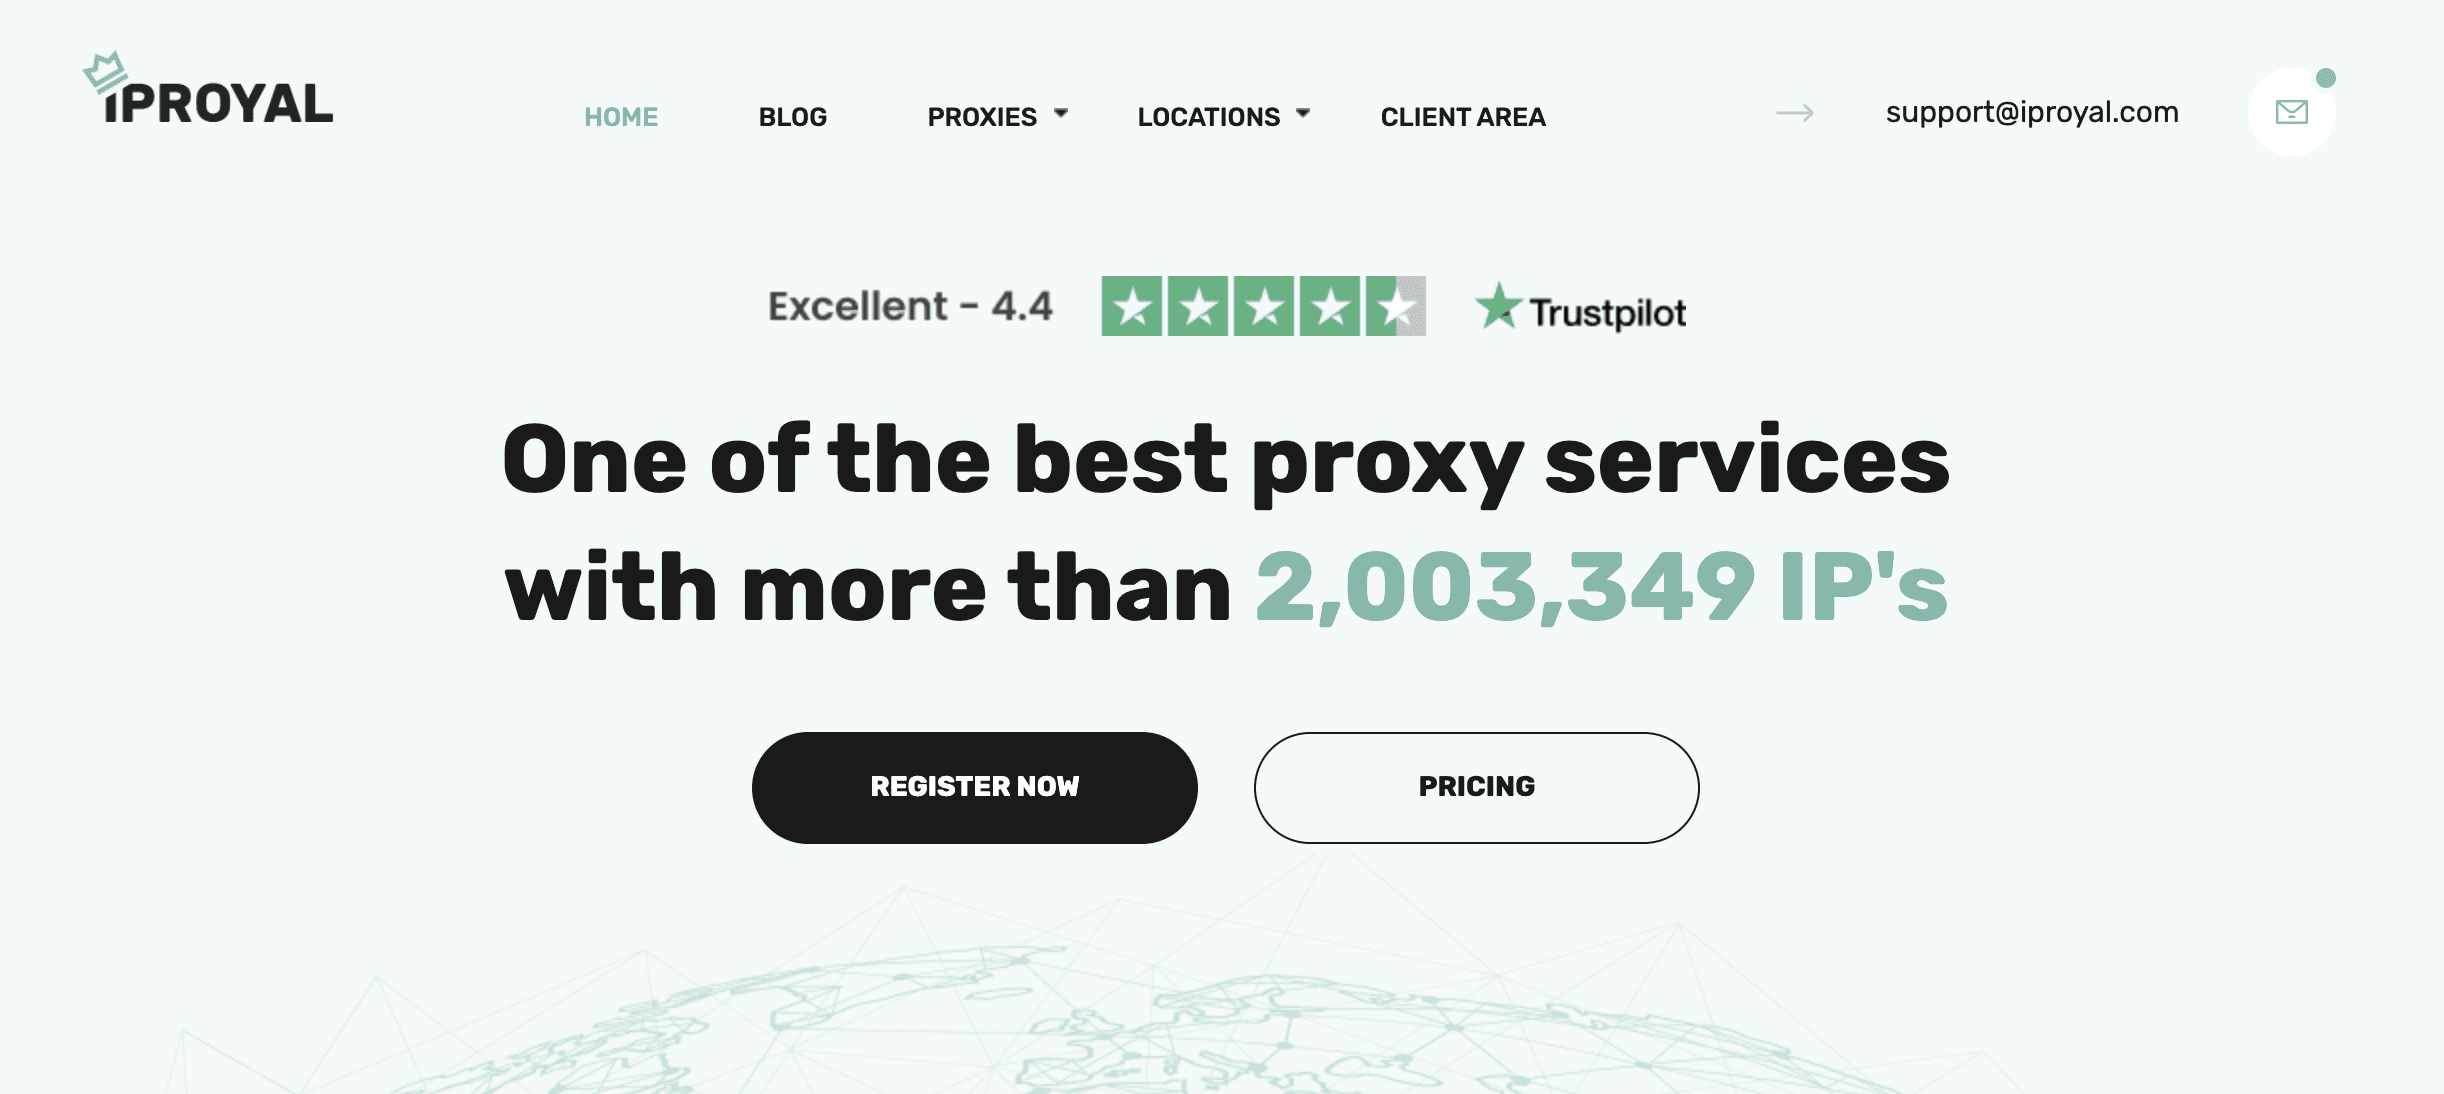 IPRoyal Overview